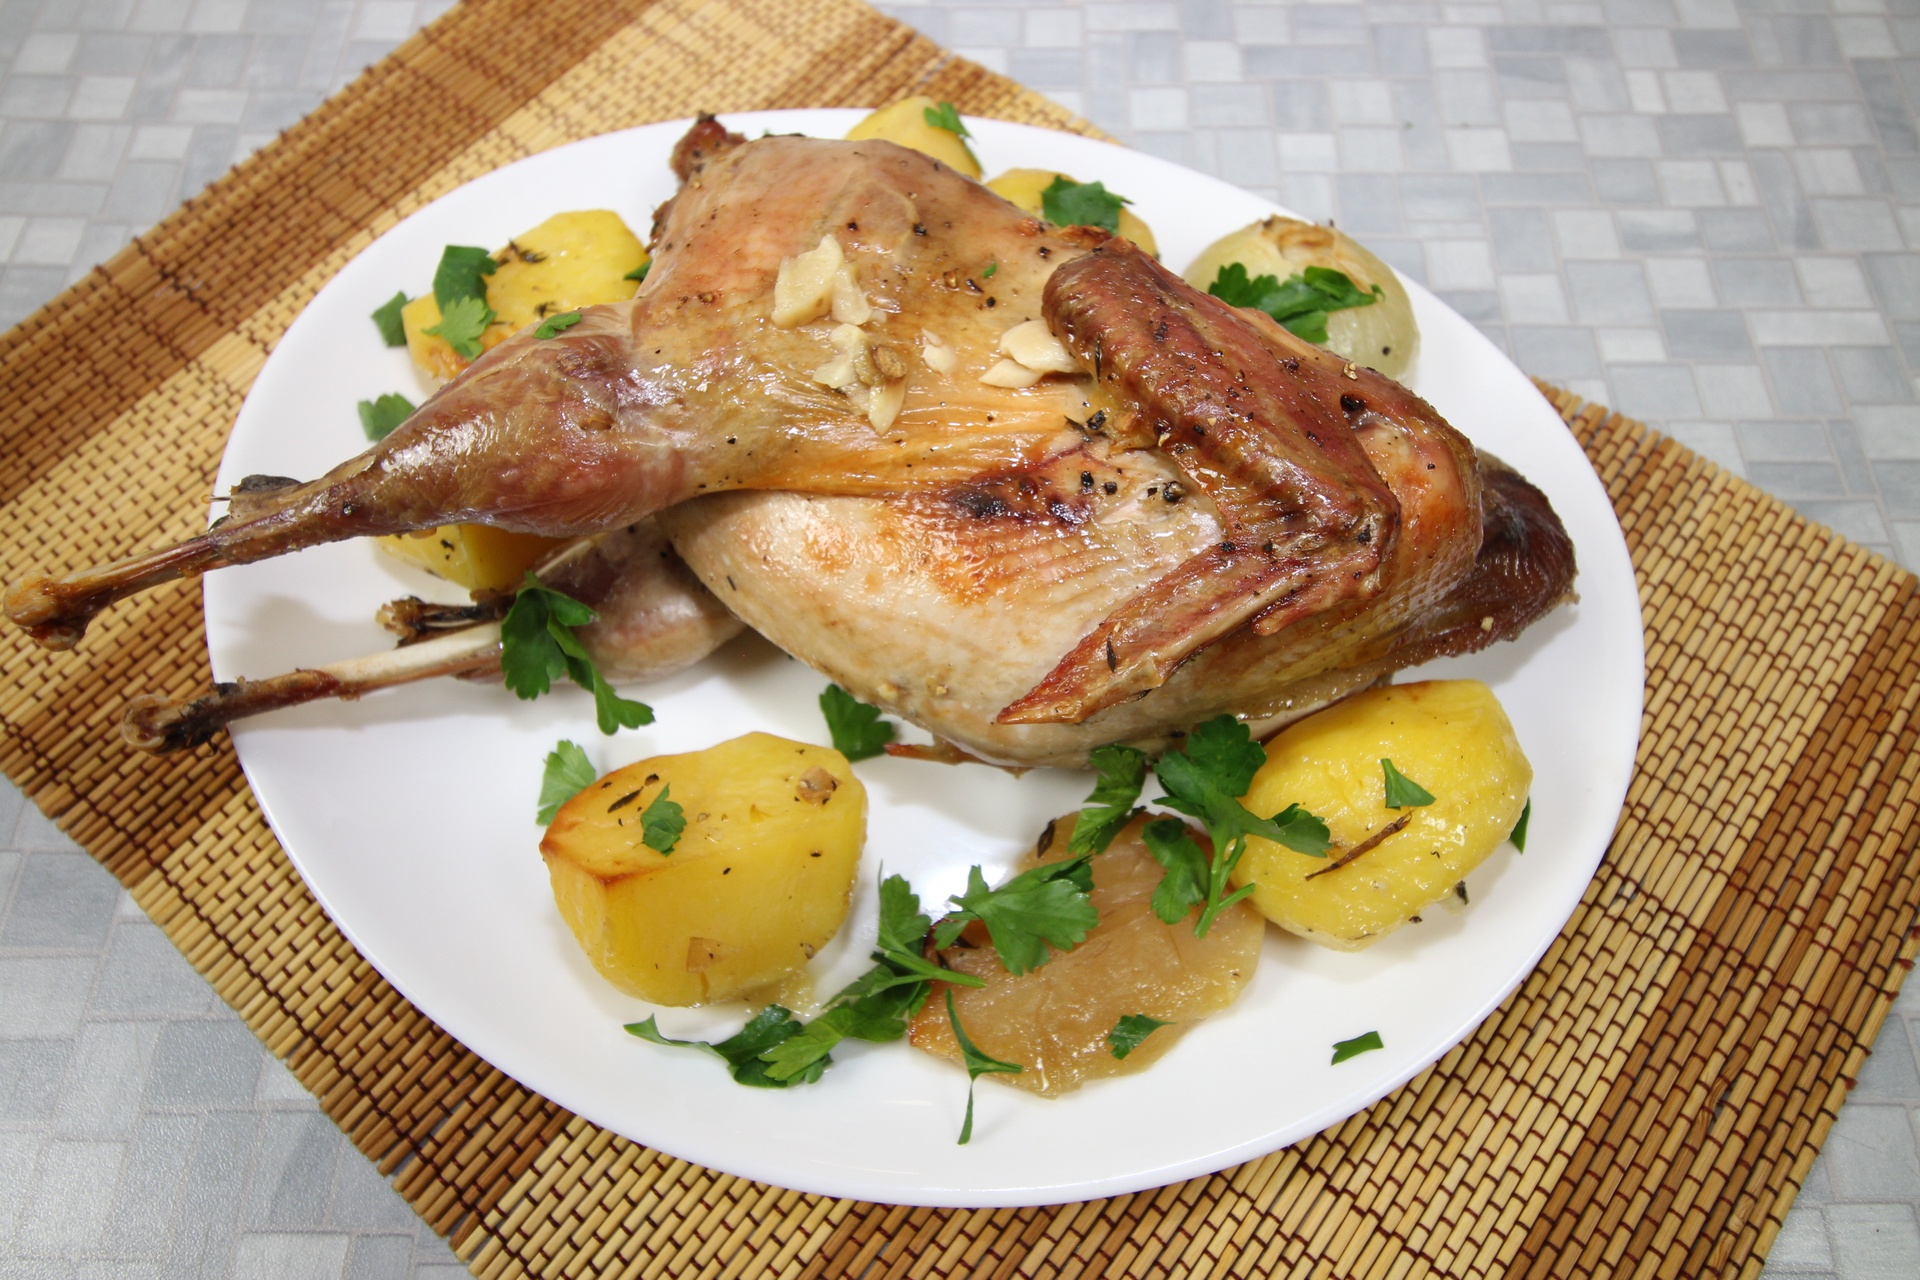 Baked pheasant stuffed with apples